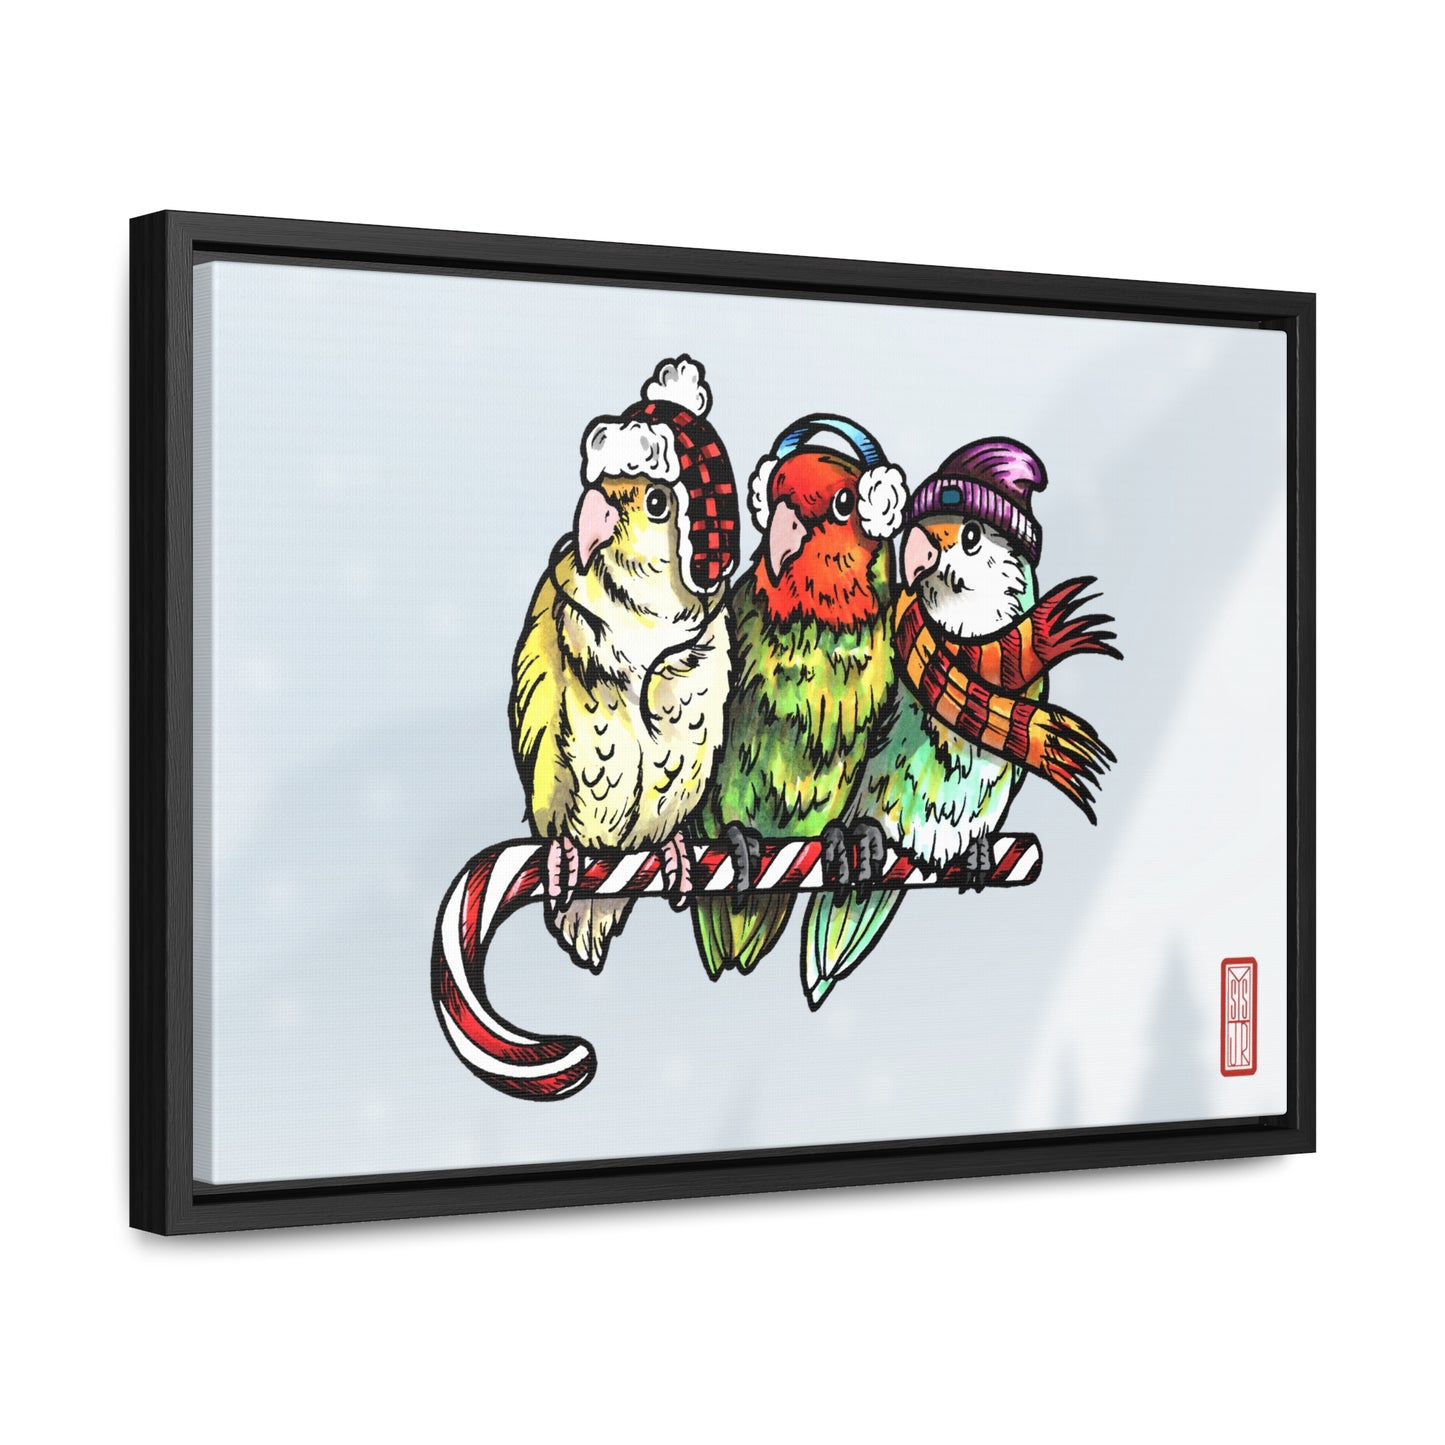 3 Lovebirds with Winter Wear & Perched on a Candy Cane, Framed Canvas Wrap Wall Art